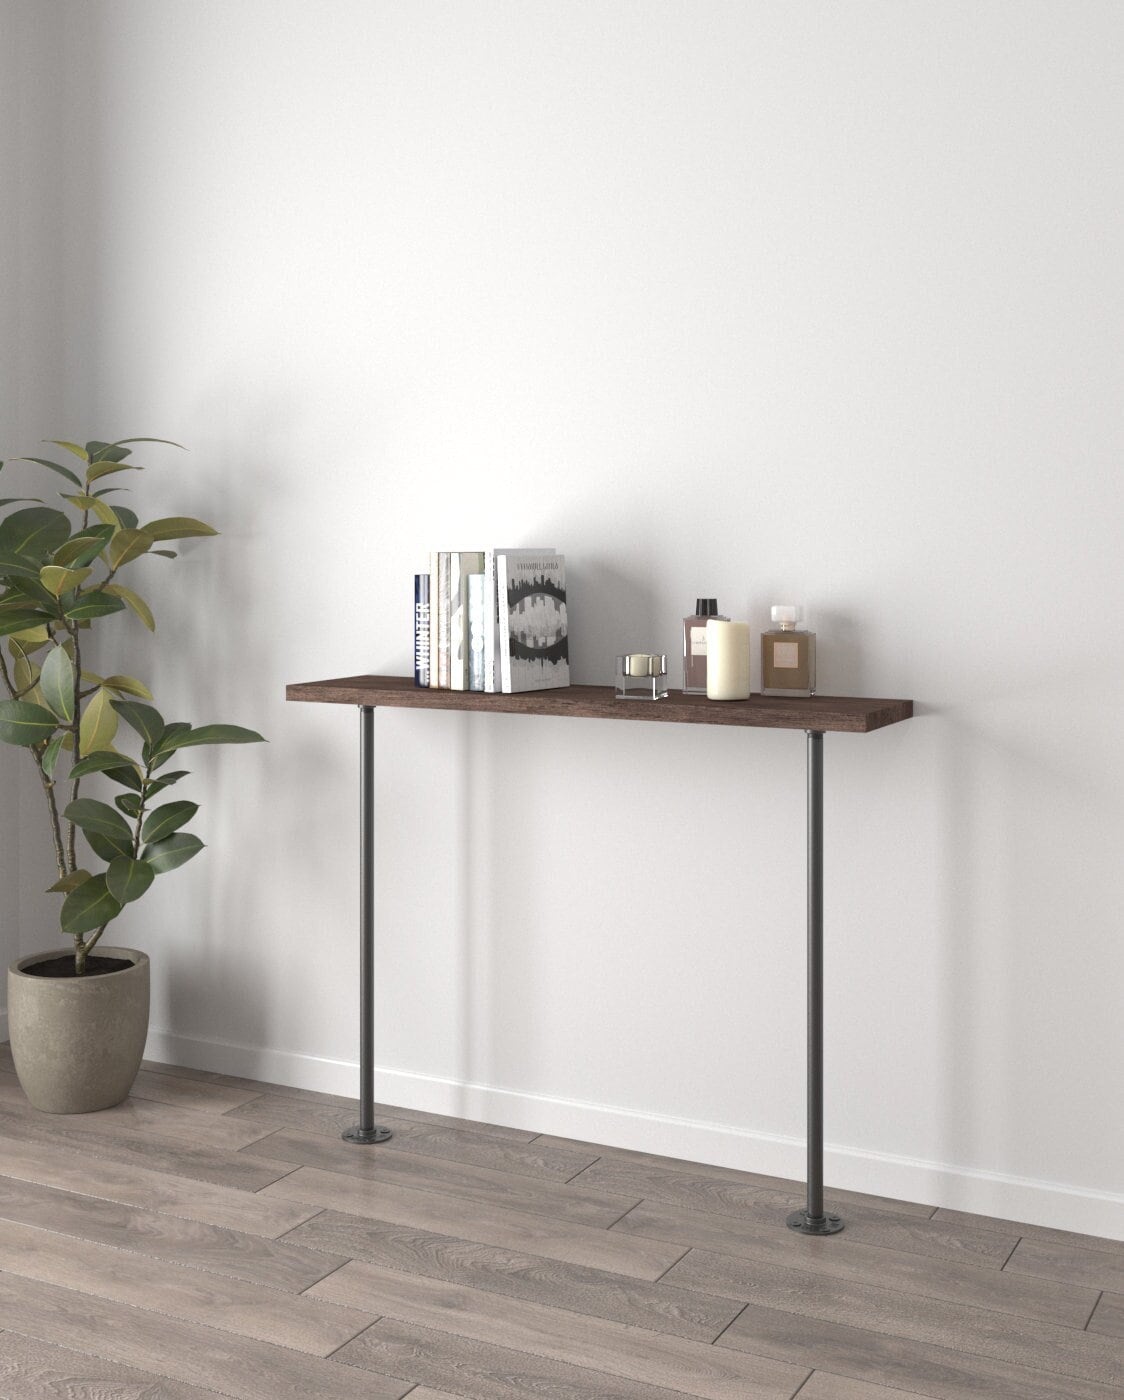 Solstice Rustic Chunky Console Table with Table Legs